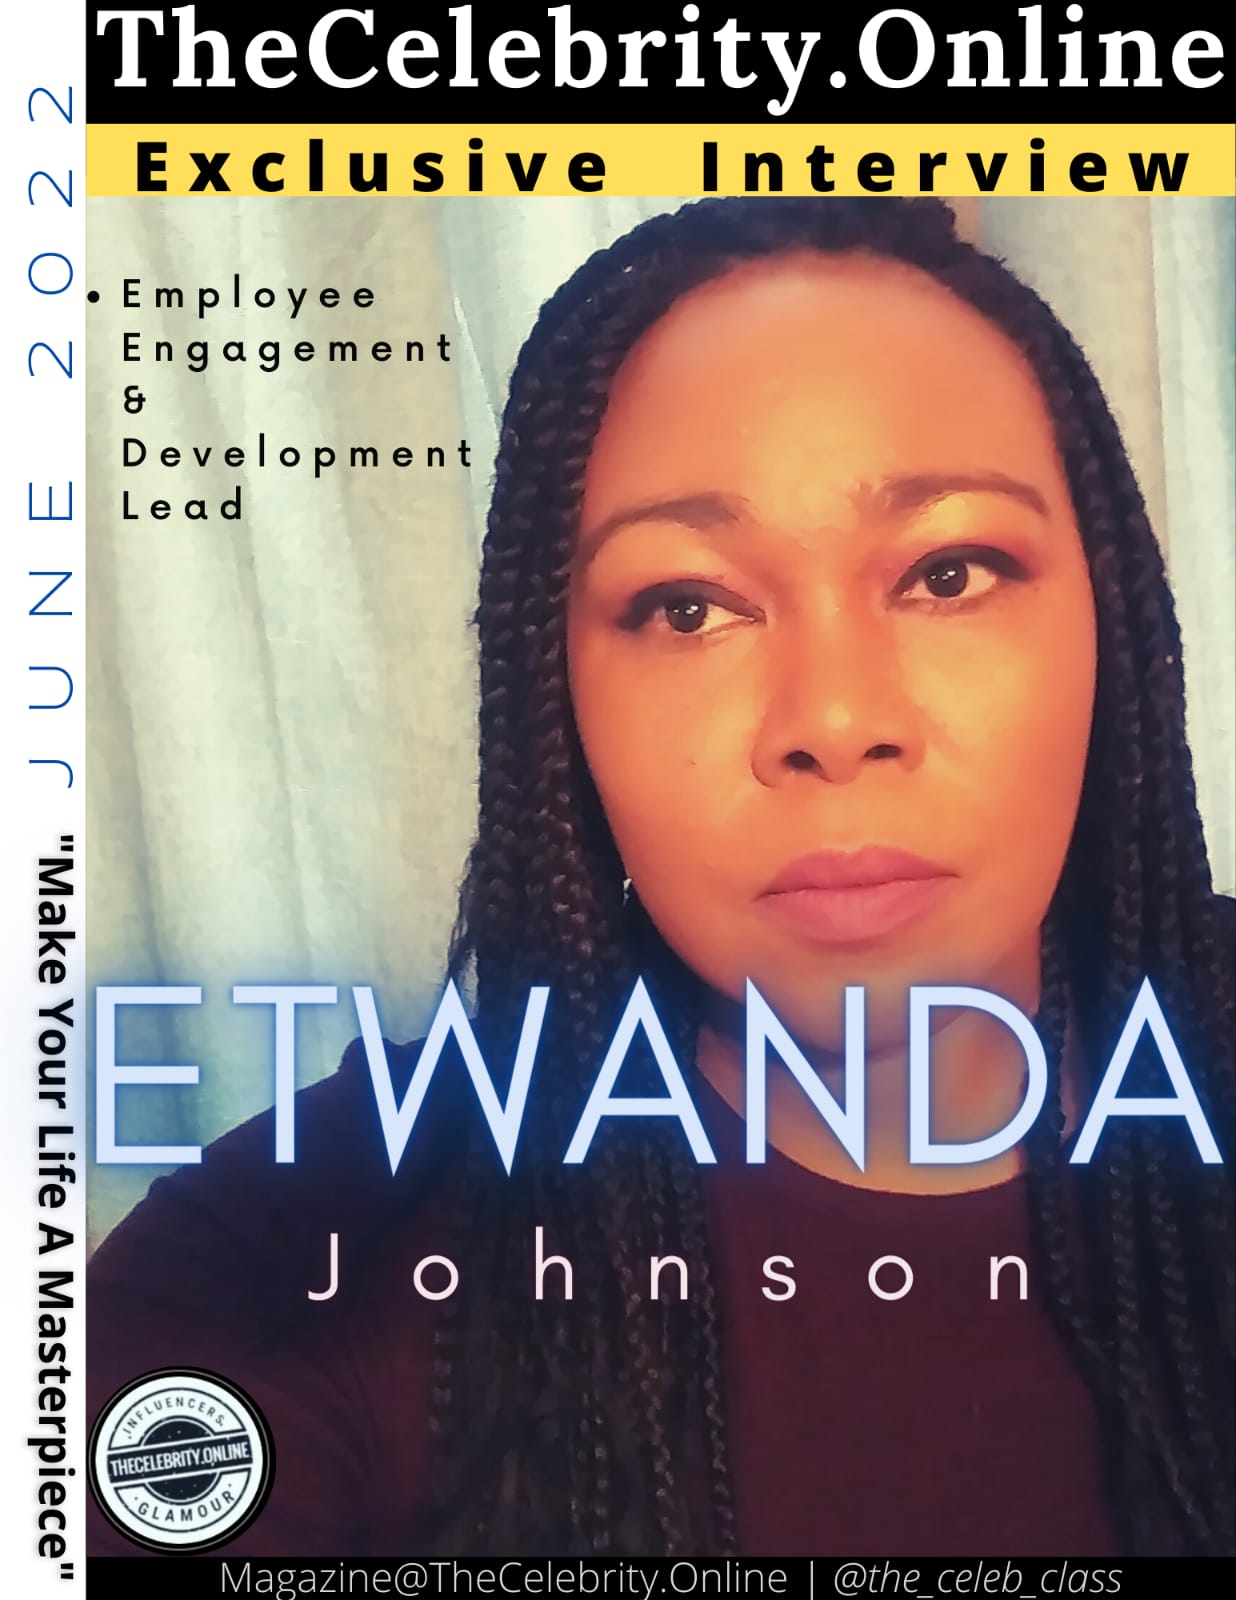 Etwanda Johnson Exclusive Interview – “My biggest achievements have been following the goals I set for myself”